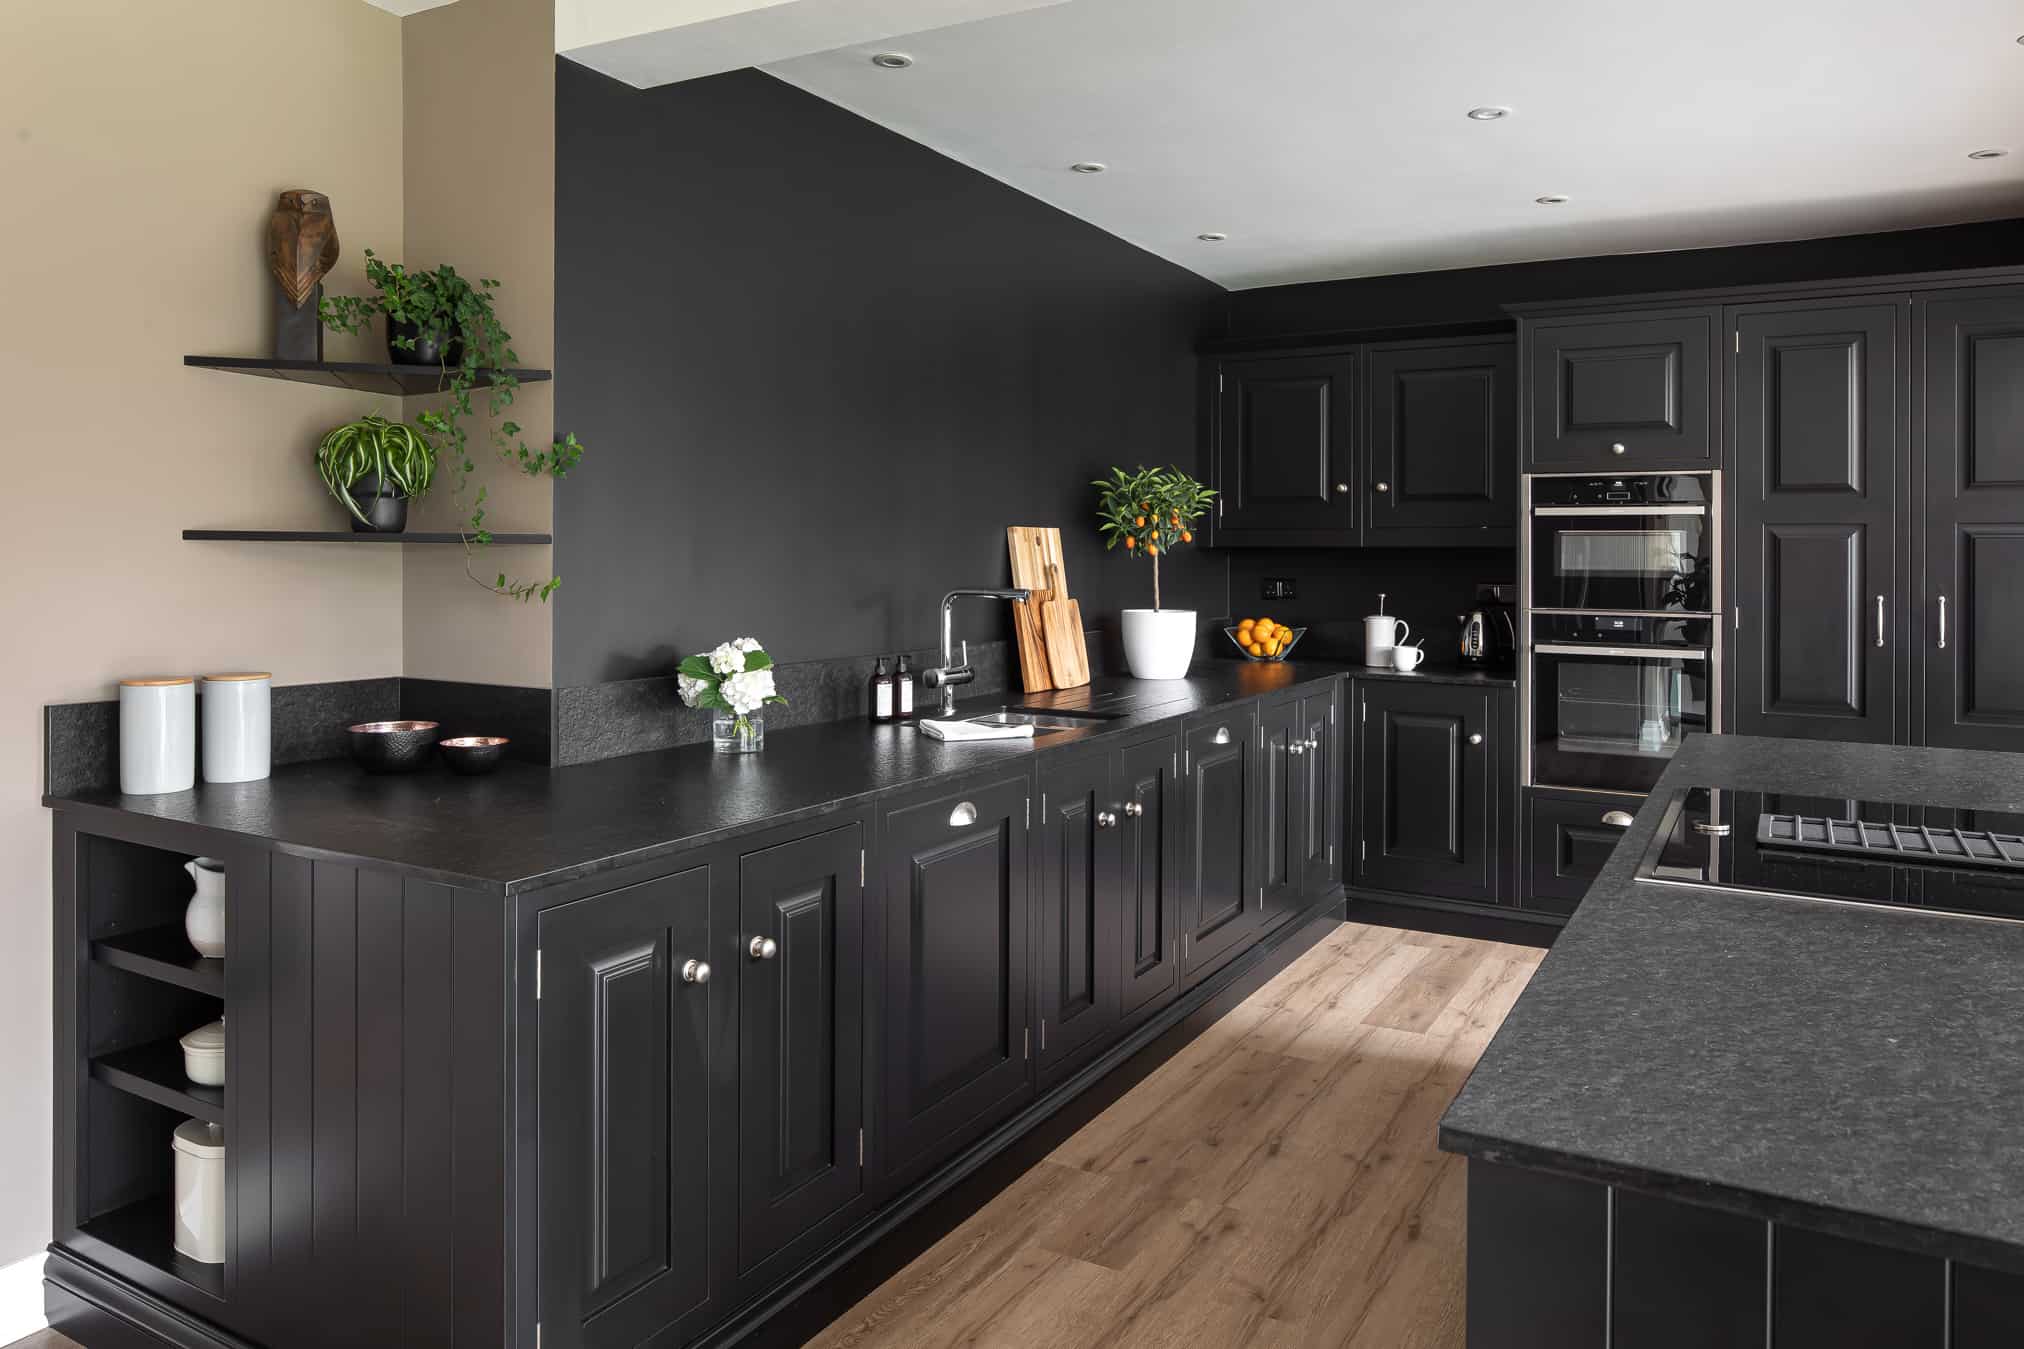 John Lewis of Hungerford luxury bespoke artisan country kitchen with black cabinetry and black granite worktops with wooden floorboards